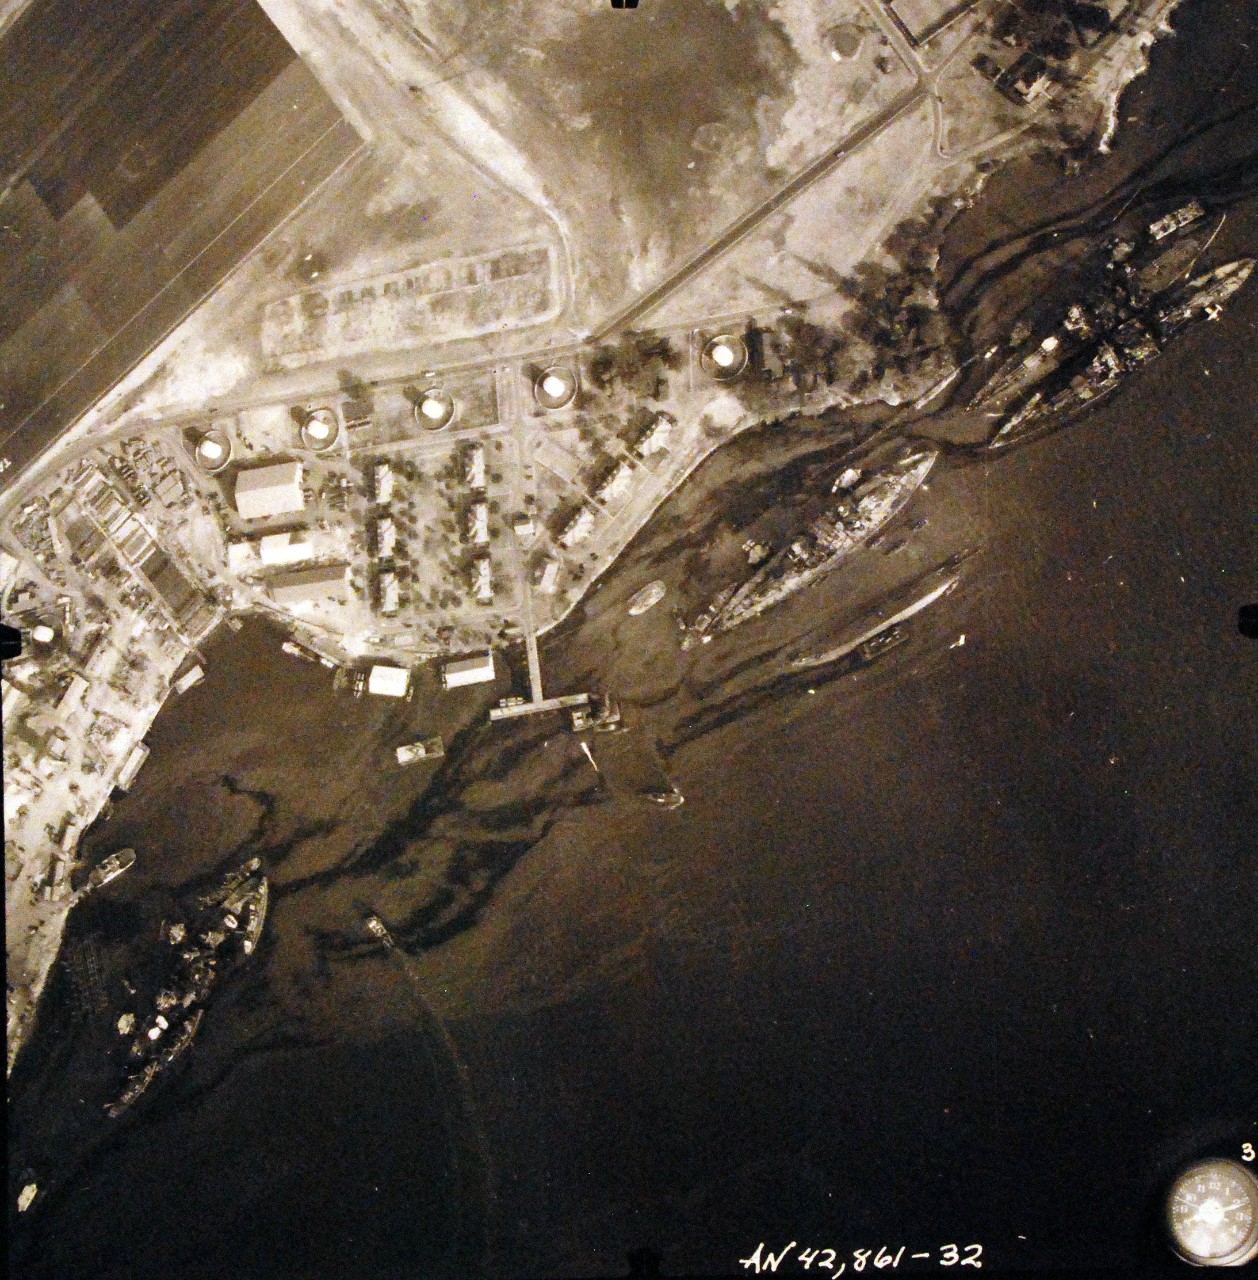 80-G-387592:  Pearl Harbor Attack, 7 December 1941.  Aerial view of "Battleship Row" moorings on the southern side of Ford Island, 10 December 1941, showing damage from the Japanese raid three days earlier.  Left, USS California (BB 44), then left to right, USS Maryland (BB-46), lightly damaged, with the capsized USS Oklahoma (BB-37) outboard. USS Tennessee (BB-43), lightly damaged, with the sunken USS West Virginia (BB-48) outboard. Note dark oil streaks on the harbor surface, originating from the sunken battleships. Photographed by VJ-1 at an altitude of 3,000 feet and released November 9, 1950.  U.S. Navy photograph, now in the collections of the National Archives.      (9/22/2015).